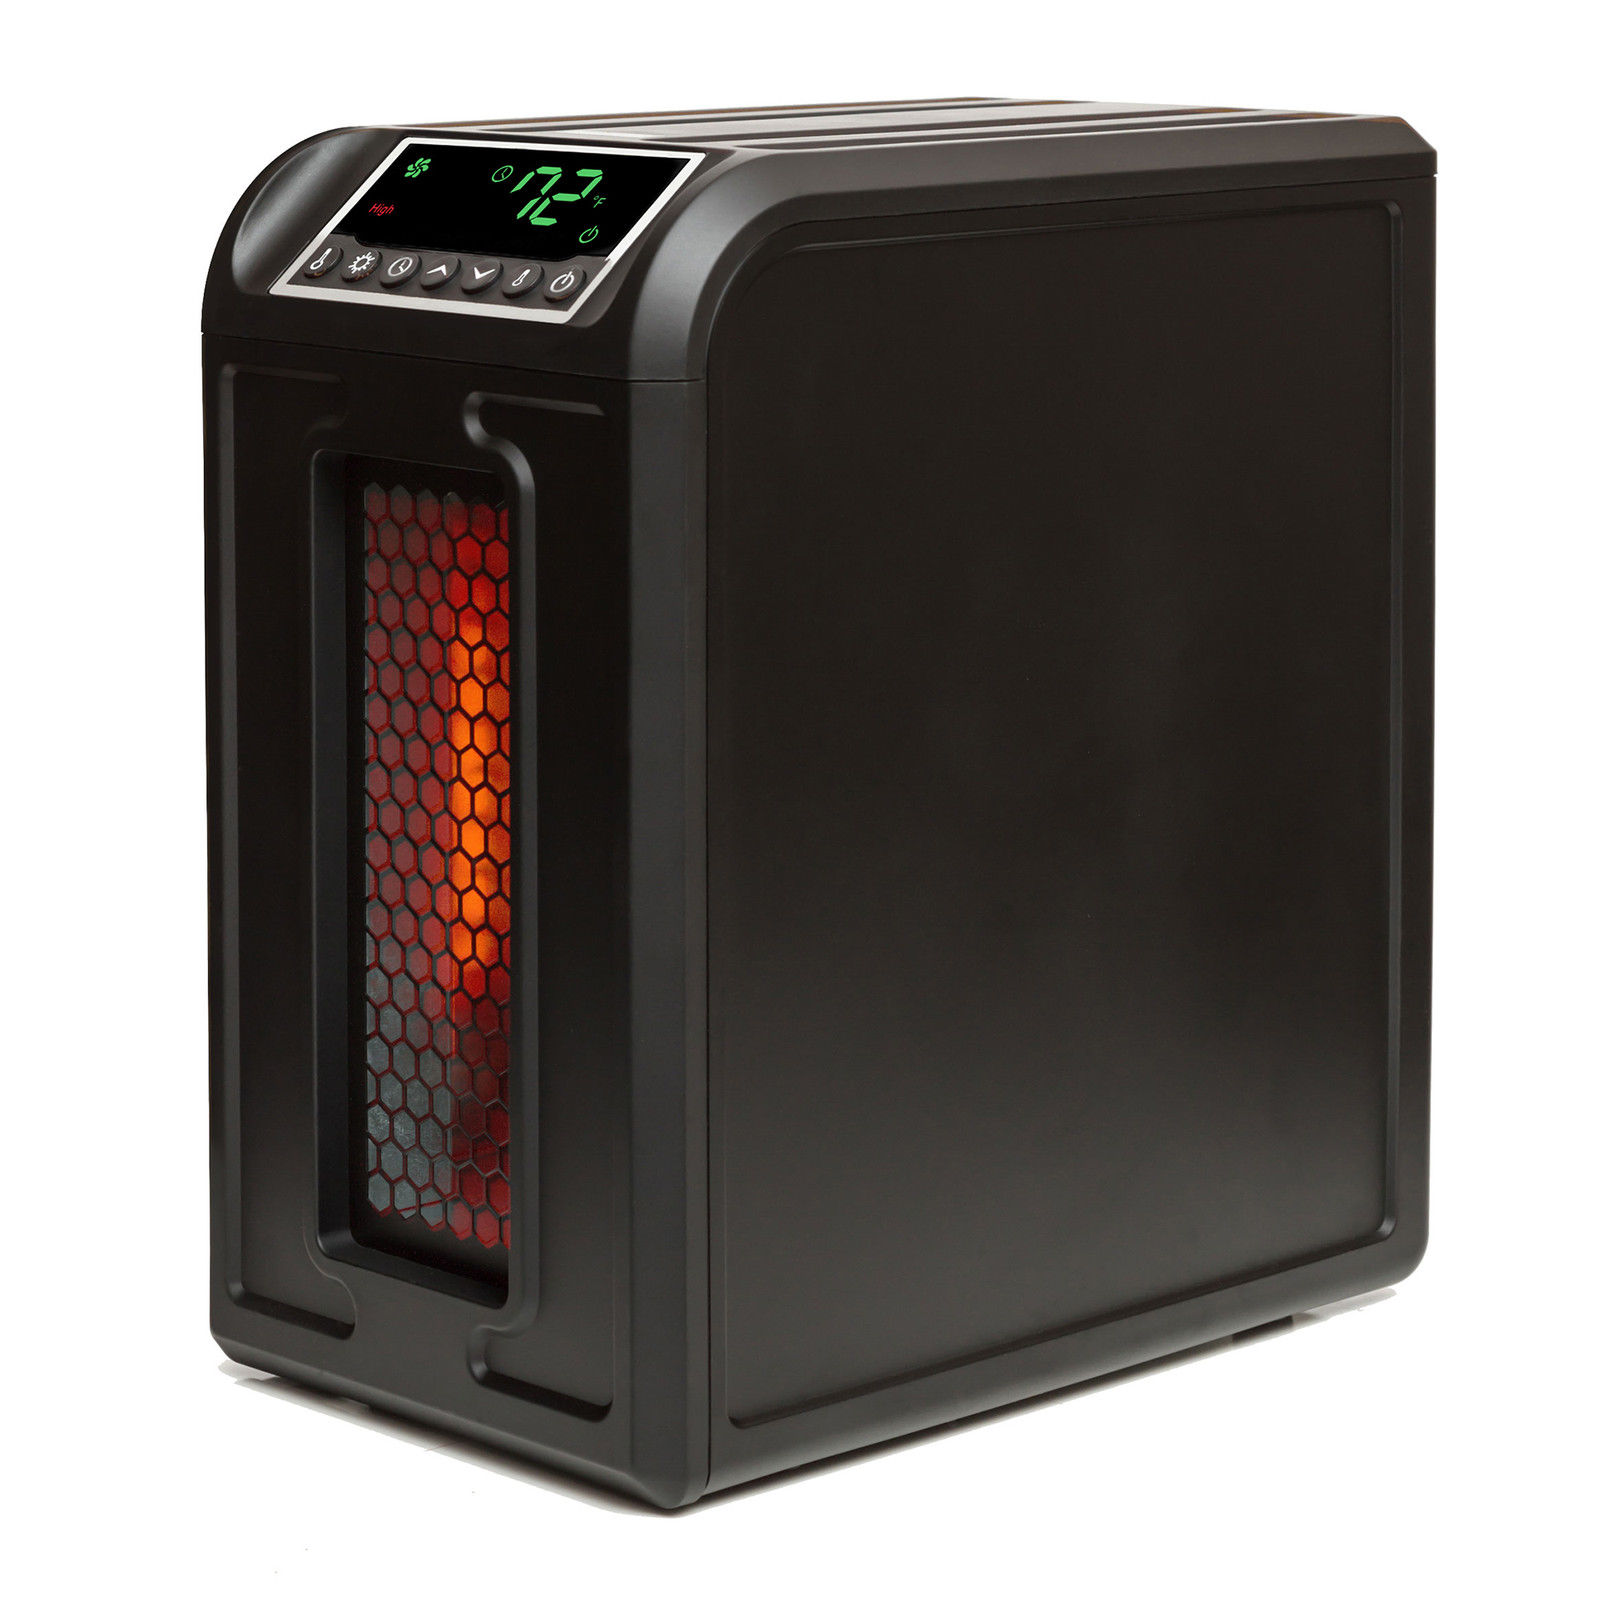 What's The Top Portable Heater You Can Purchase?